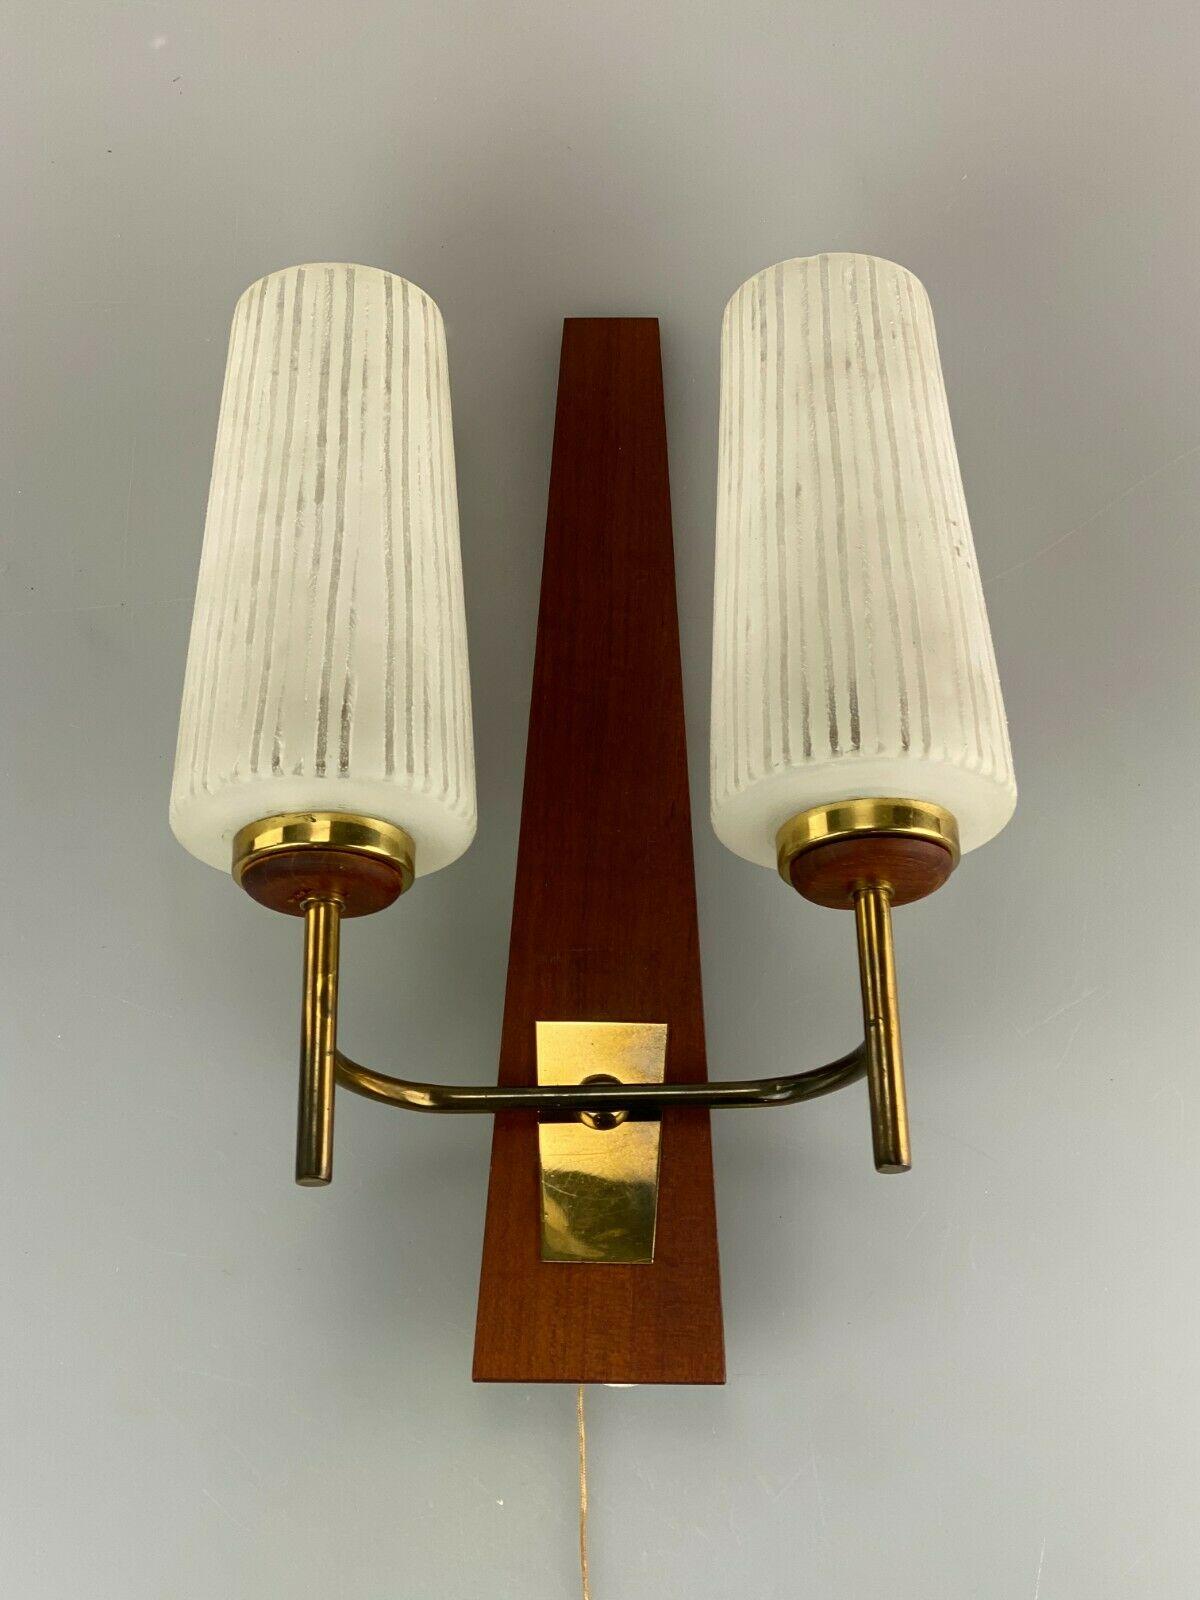 60s 70s Wall light wall lamp lamp wall bag lamp teak design 60s 70s

Object: wall lamp

Manufacturer:

Condition: good

Age: around 1960-1970

Dimensions:

34cm x 23.5cm x 13cm

Other notes:

The pictures serve as part of the